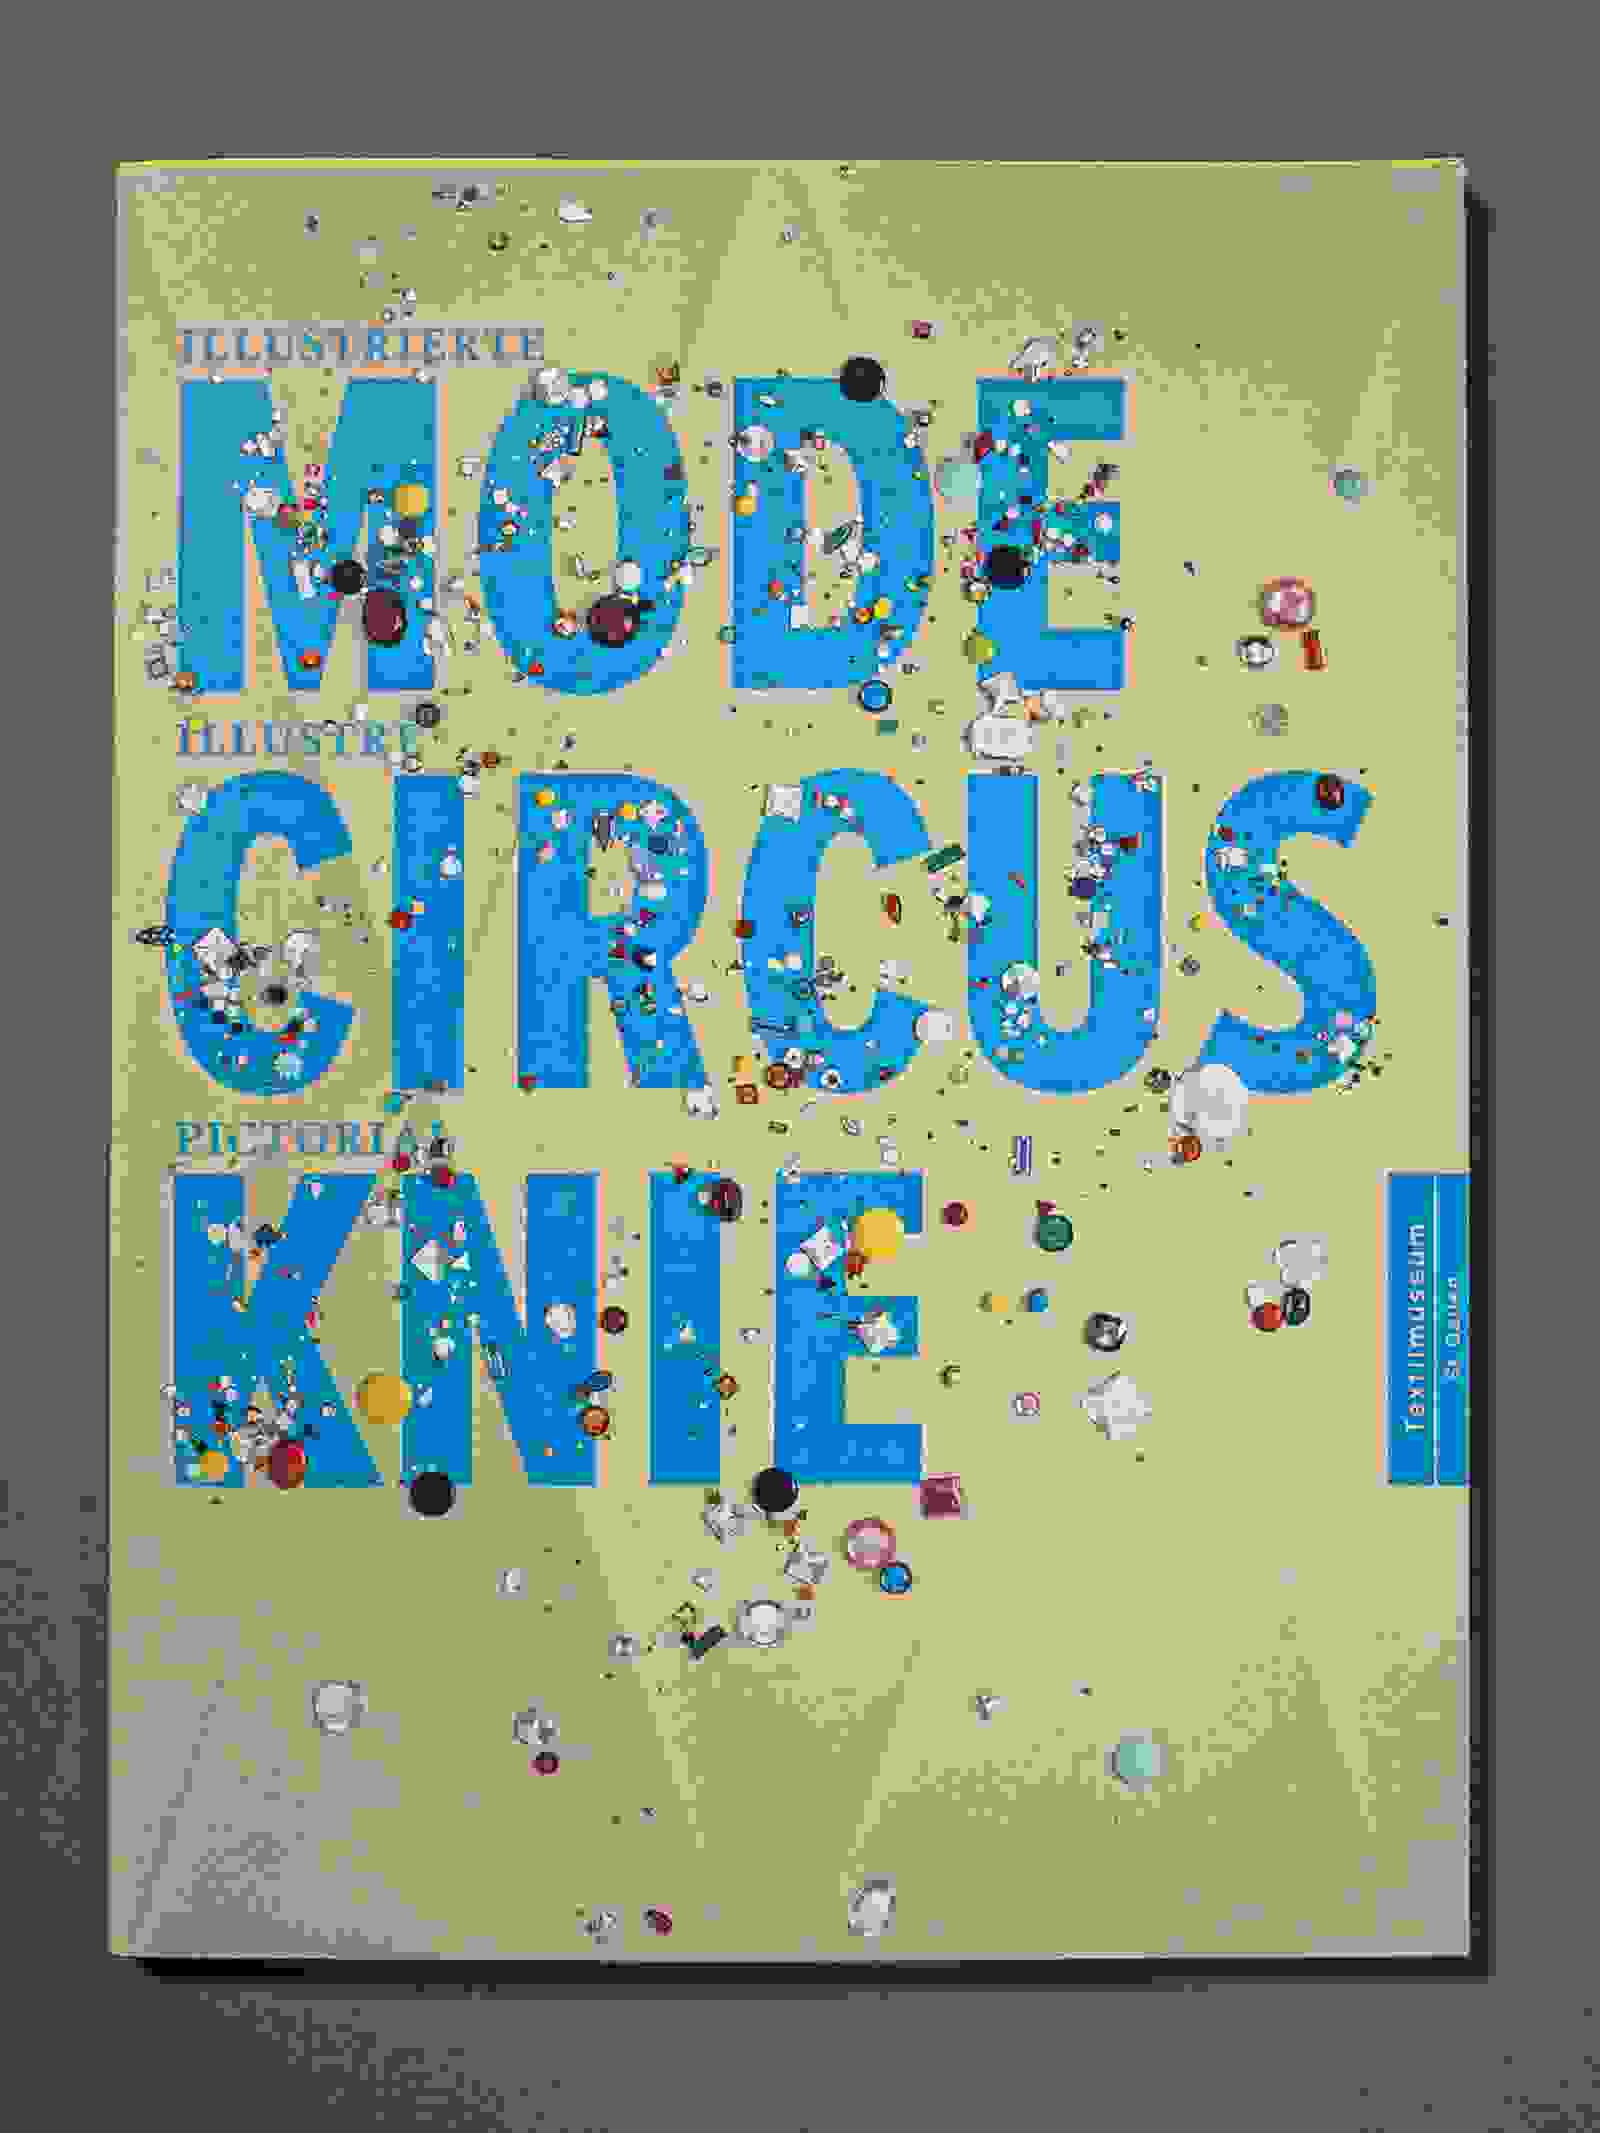 Publikation Mode Circus Knie